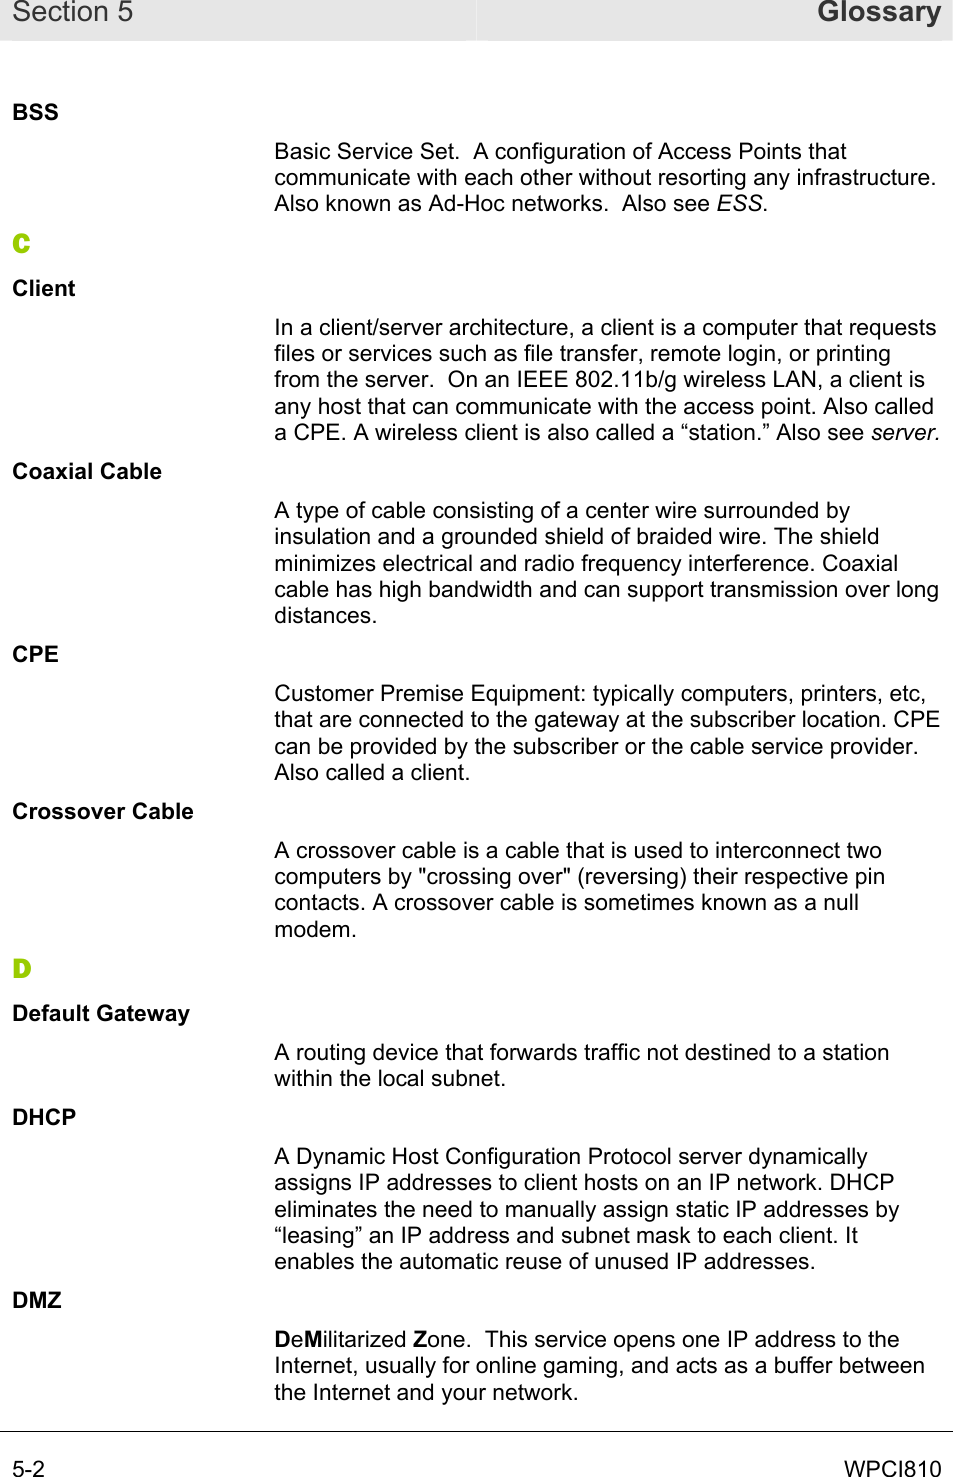 Section 5  Glossary 5-2  WPCI810 BSS Basic Service Set.  A configuration of Access Points that communicate with each other without resorting any infrastructure. Also known as Ad-Hoc networks.  Also see ESS. C Client In a client/server architecture, a client is a computer that requests files or services such as file transfer, remote login, or printing from the server.  On an IEEE 802.11b/g wireless LAN, a client is any host that can communicate with the access point. Also called a CPE. A wireless client is also called a “station.” Also see server. Coaxial Cable A type of cable consisting of a center wire surrounded by insulation and a grounded shield of braided wire. The shield minimizes electrical and radio frequency interference. Coaxial cable has high bandwidth and can support transmission over long distances. CPE Customer Premise Equipment: typically computers, printers, etc, that are connected to the gateway at the subscriber location. CPE can be provided by the subscriber or the cable service provider. Also called a client. Crossover Cable A crossover cable is a cable that is used to interconnect two computers by &quot;crossing over&quot; (reversing) their respective pin contacts. A crossover cable is sometimes known as a null modem.  D Default Gateway A routing device that forwards traffic not destined to a station within the local subnet. DHCP A Dynamic Host Configuration Protocol server dynamically assigns IP addresses to client hosts on an IP network. DHCP eliminates the need to manually assign static IP addresses by “leasing” an IP address and subnet mask to each client. It enables the automatic reuse of unused IP addresses. DMZ DeMilitarized Zone.  This service opens one IP address to the Internet, usually for online gaming, and acts as a buffer between the Internet and your network. 